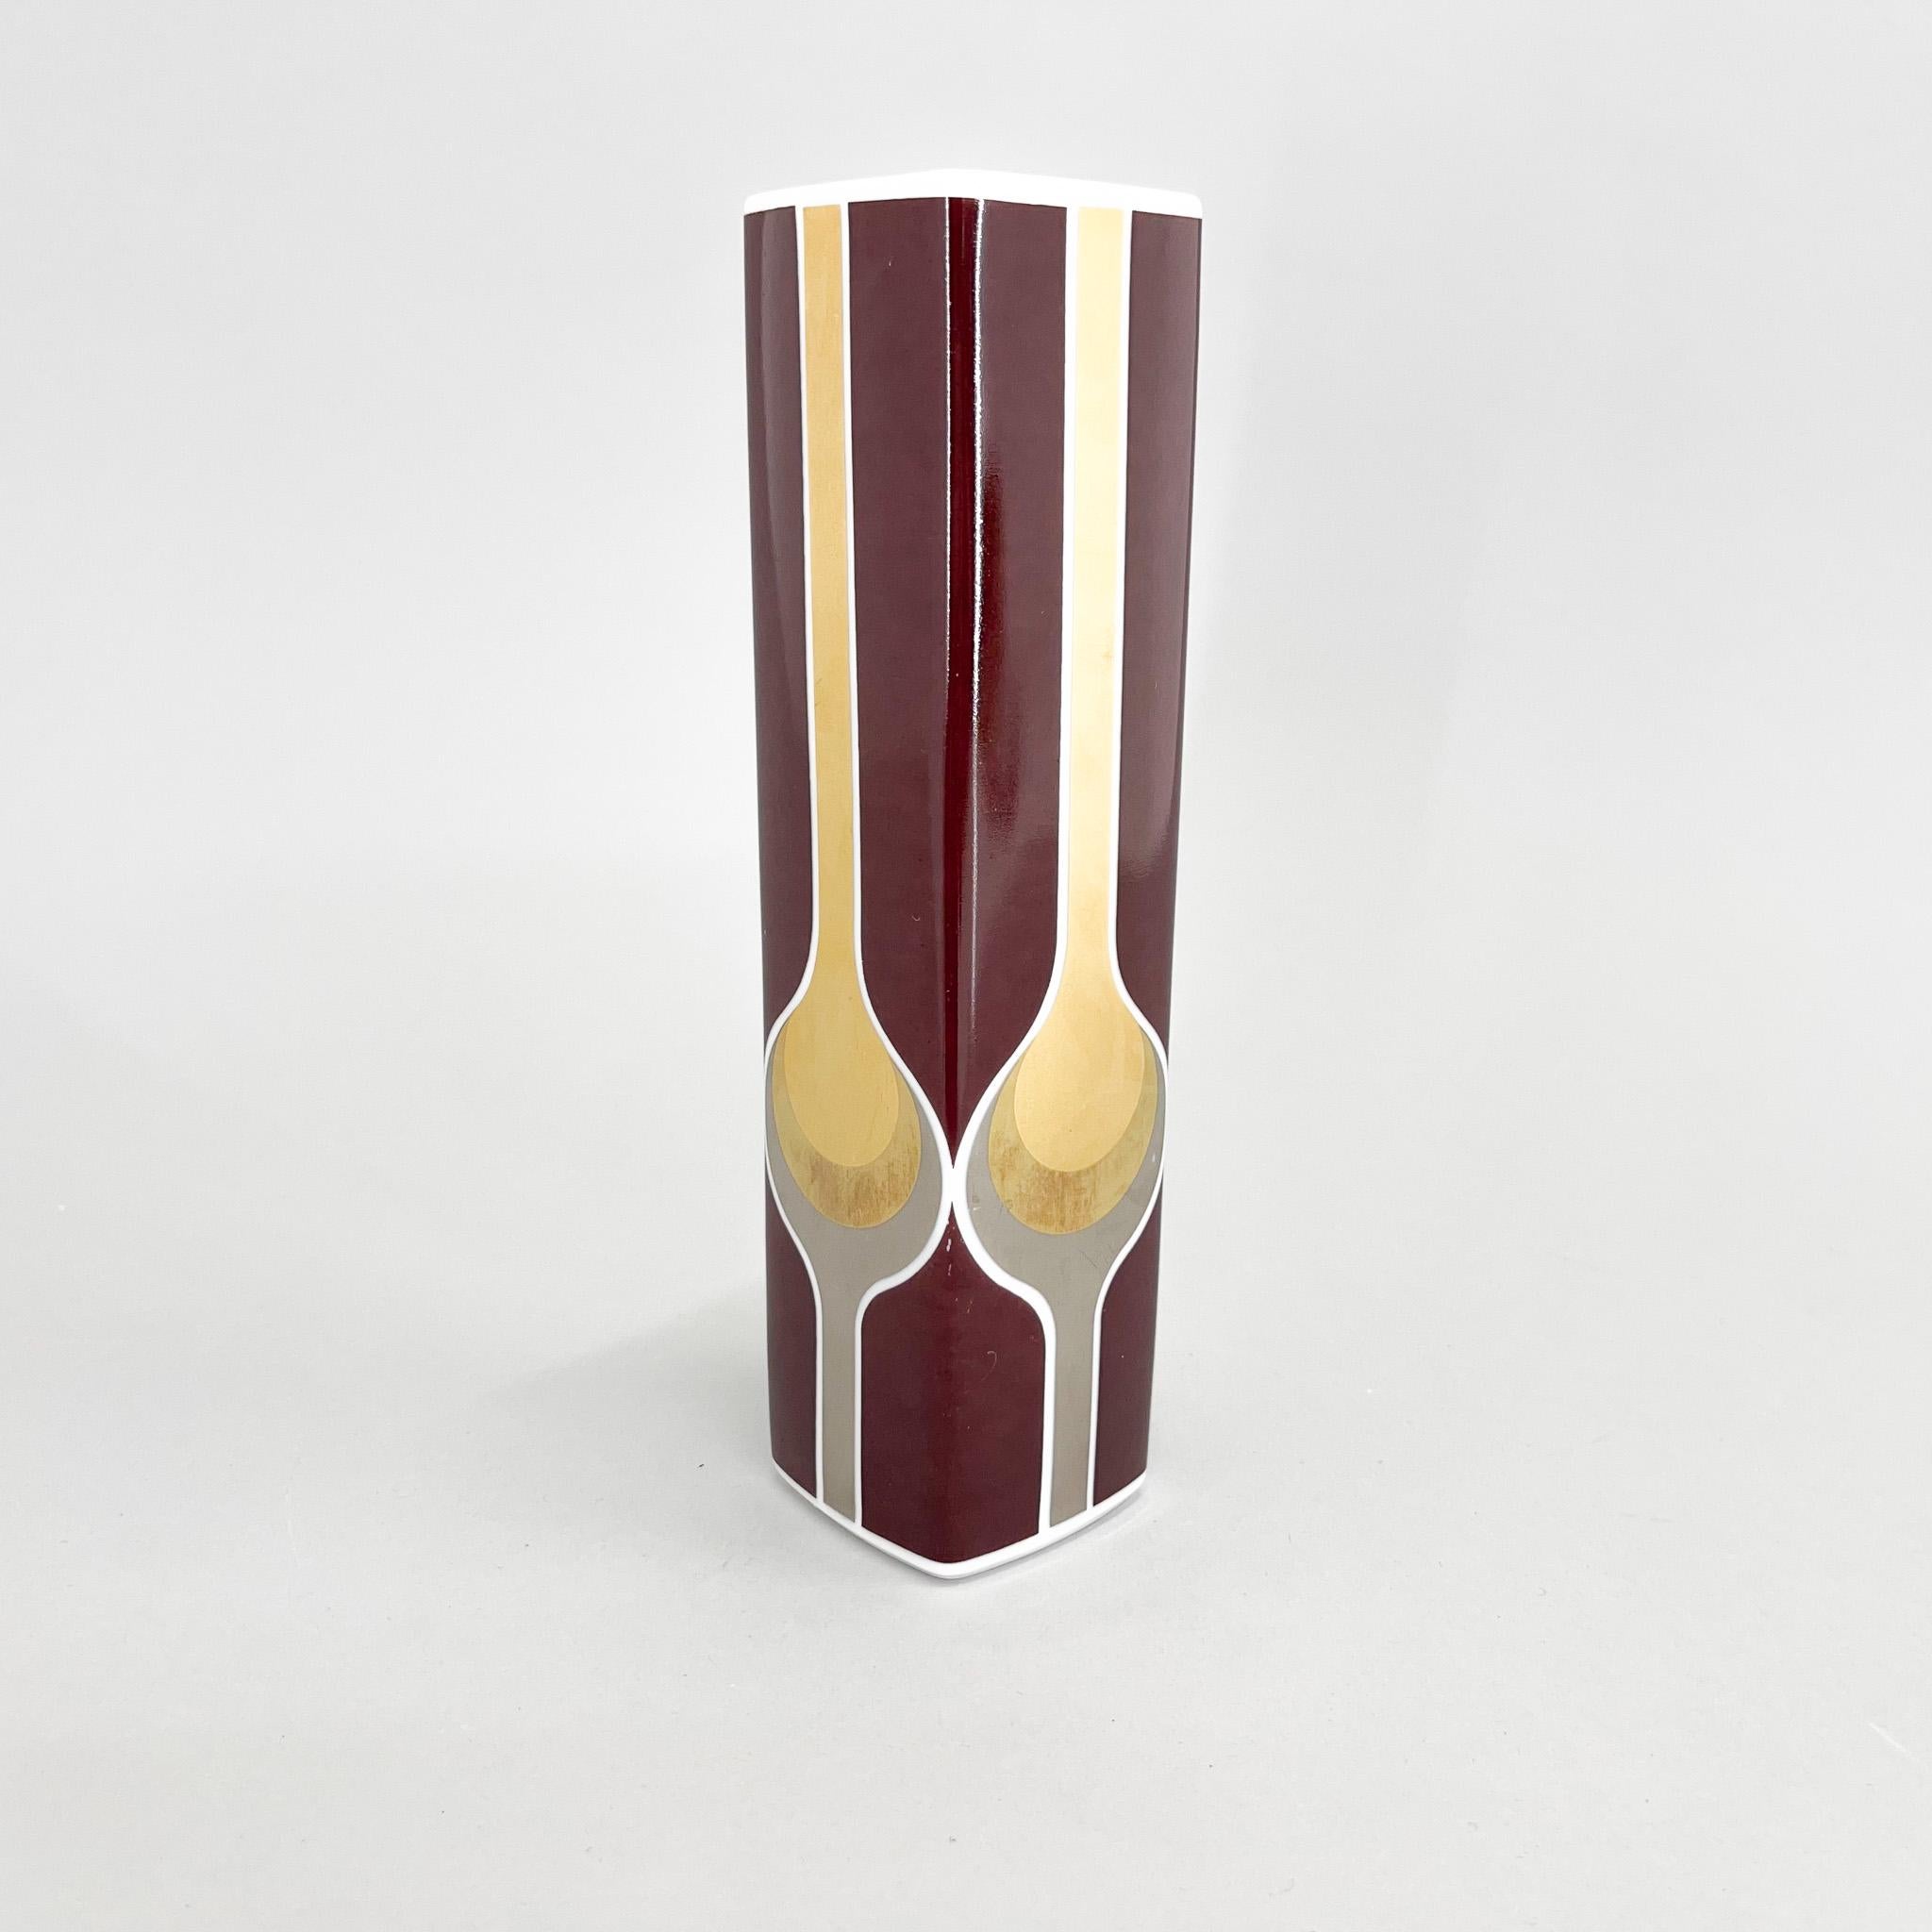 Small porcelain vase made in Germany in the 1970s by the Heinrich factory. Beautiful seventies design.